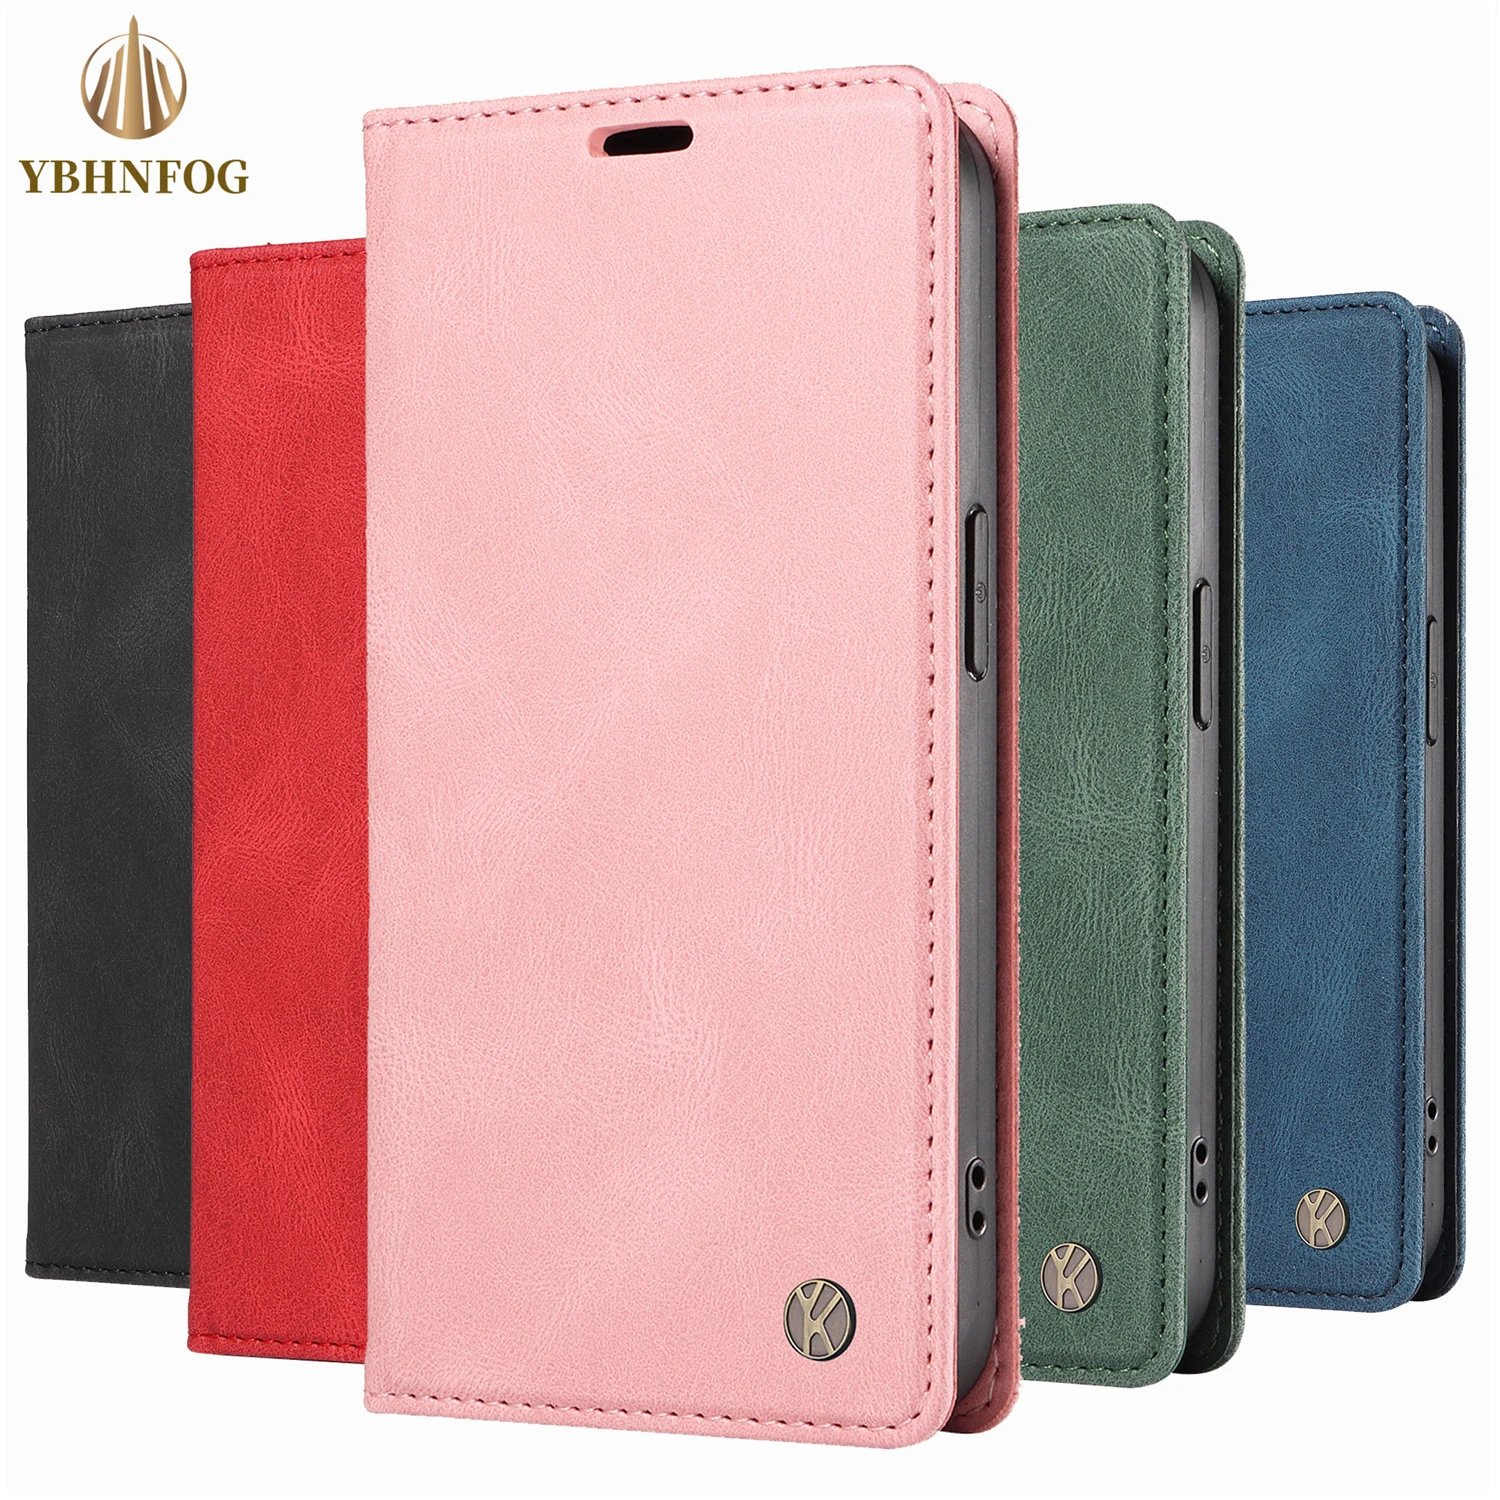 Leather Case For Huawei P8 P9 Lite 2017 P7 P10 P20 P30 P40 Lite Wallet Cover For Huawei Y3 Y5 Y6 2018 Y7 2019 Flip Stand Bags